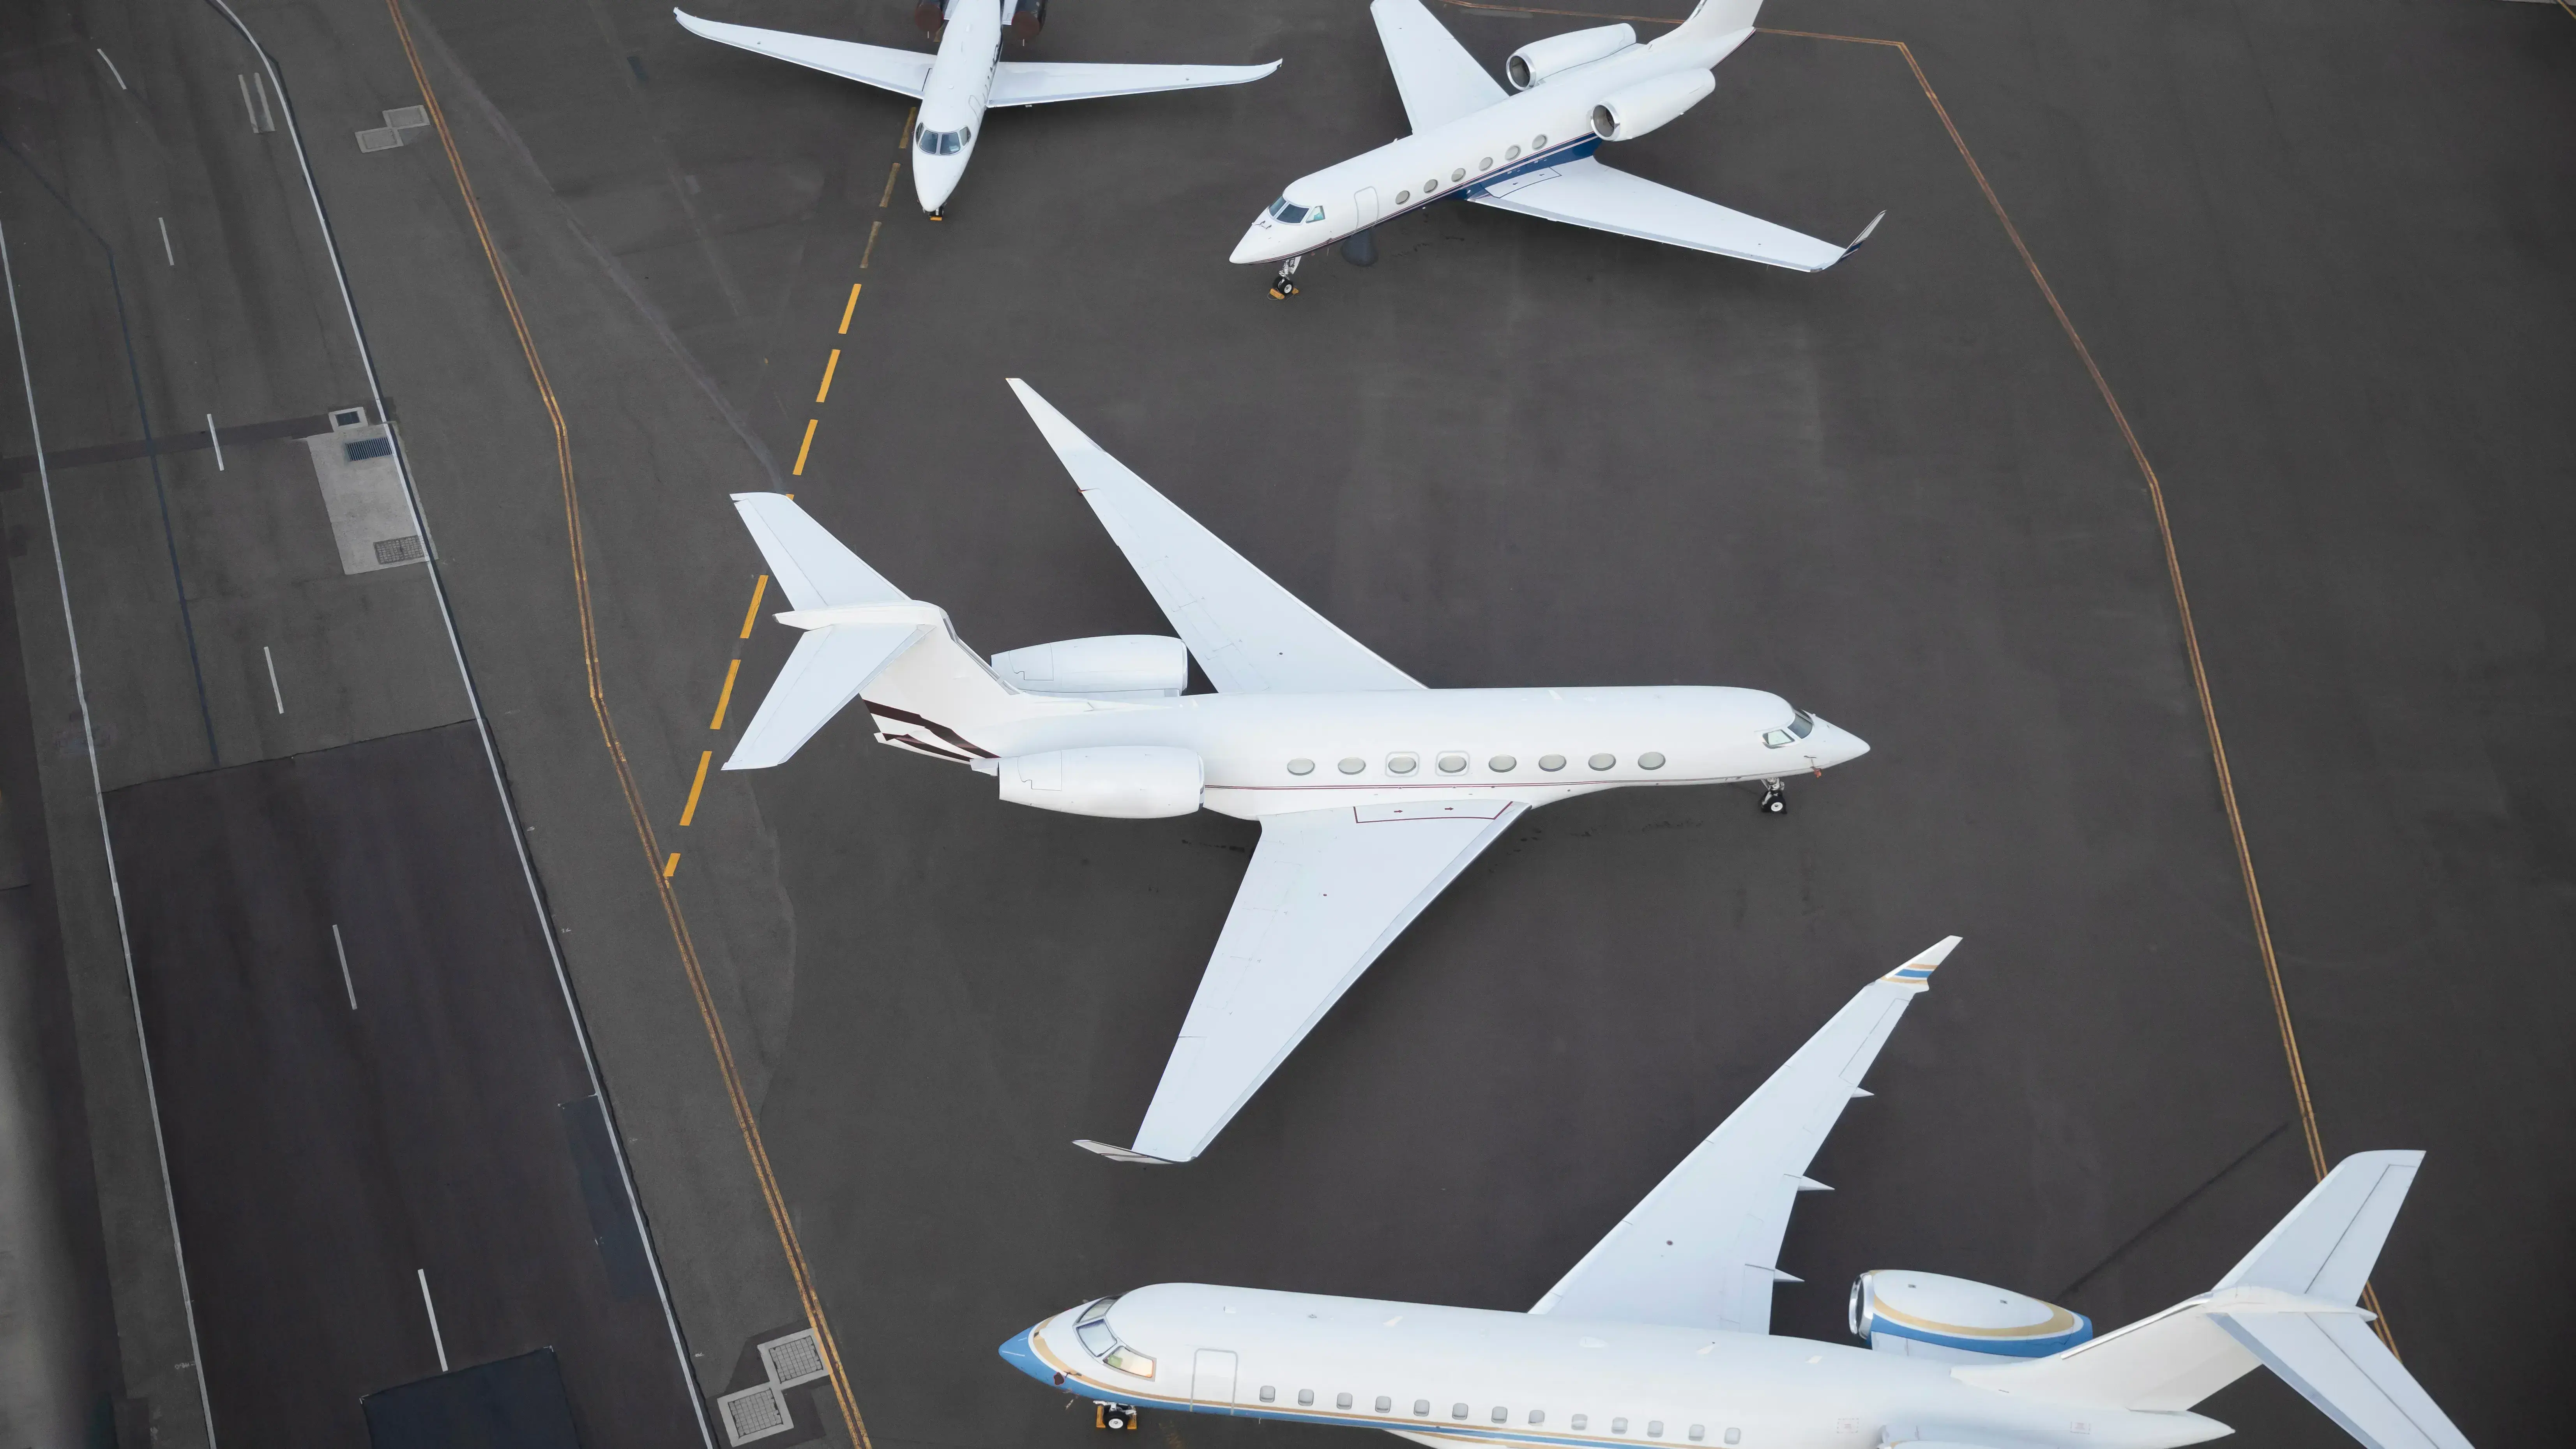 Several business jets standing beside a runway, facing different directions